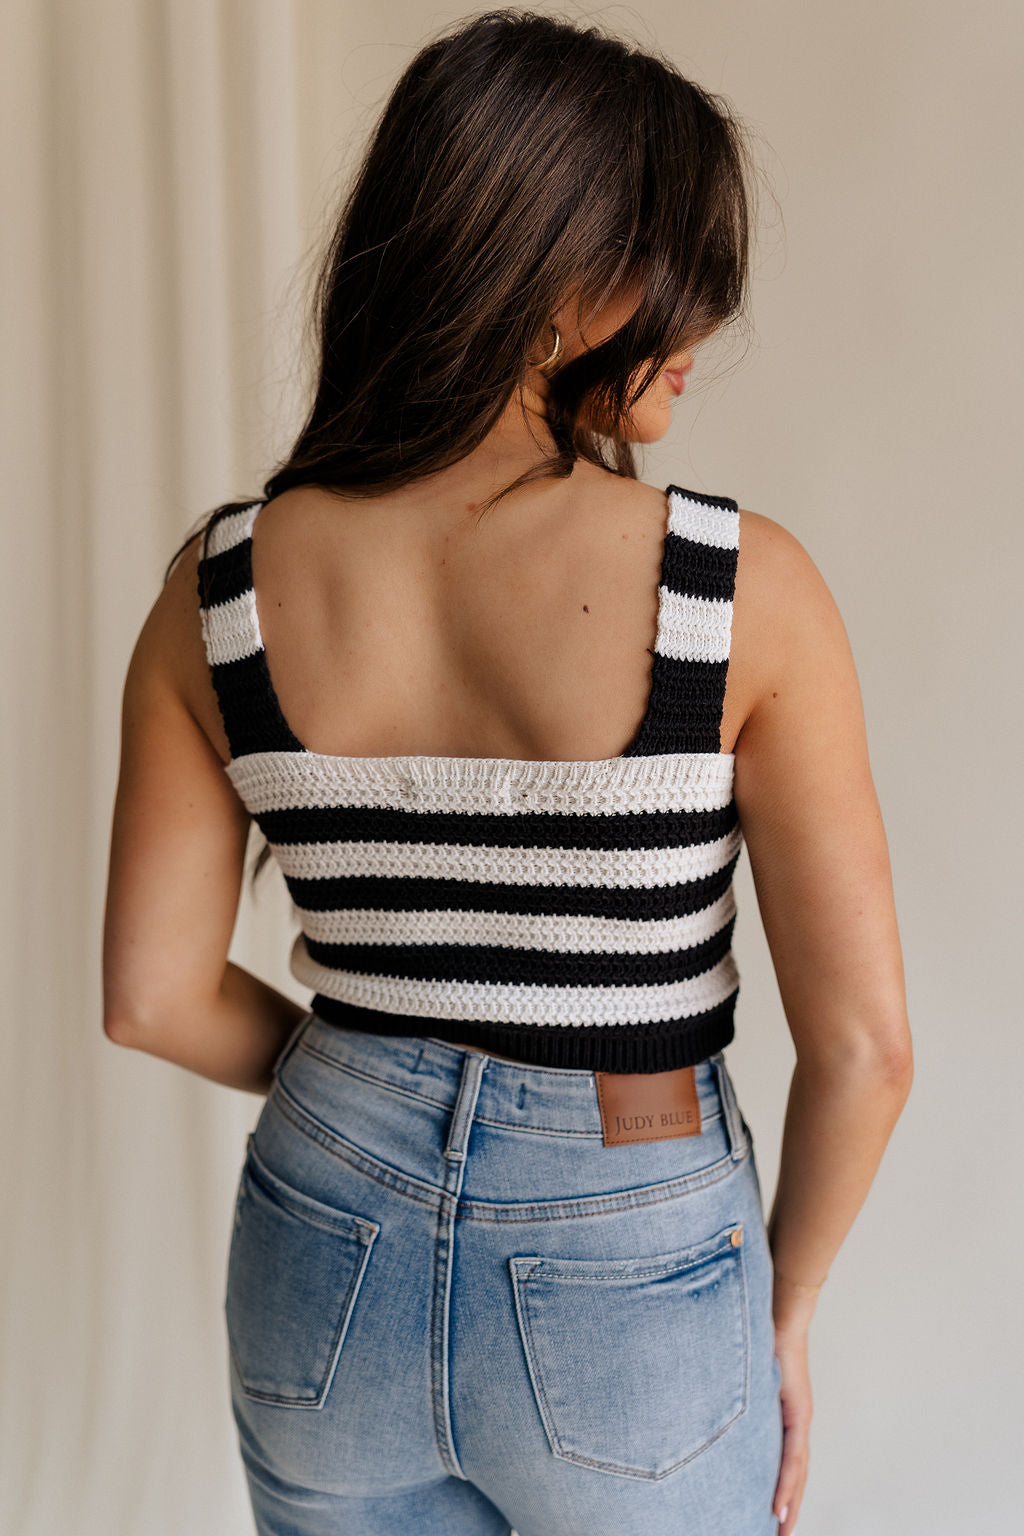 back view of female model wearing the Kai Black & White Stripe Knit Tank which features Black and White Crochet Knit, Stripe Pattern, Cropped Waist, Rhinestone Button Up, Square Neckline and Sleeveless